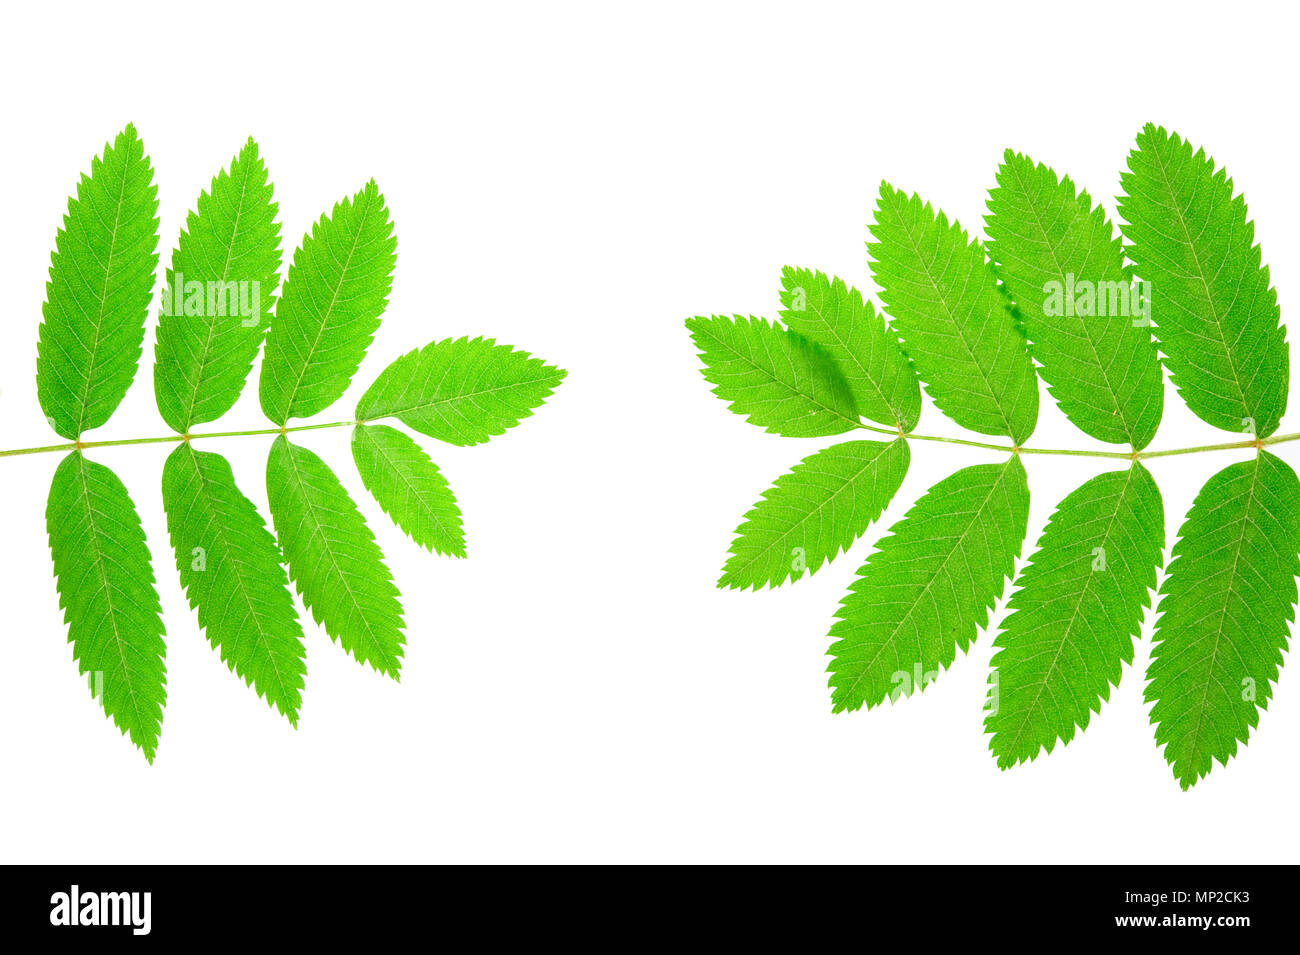 Rowan (Sorbus aucuparia) leaves isolated on white background. Stock Photo